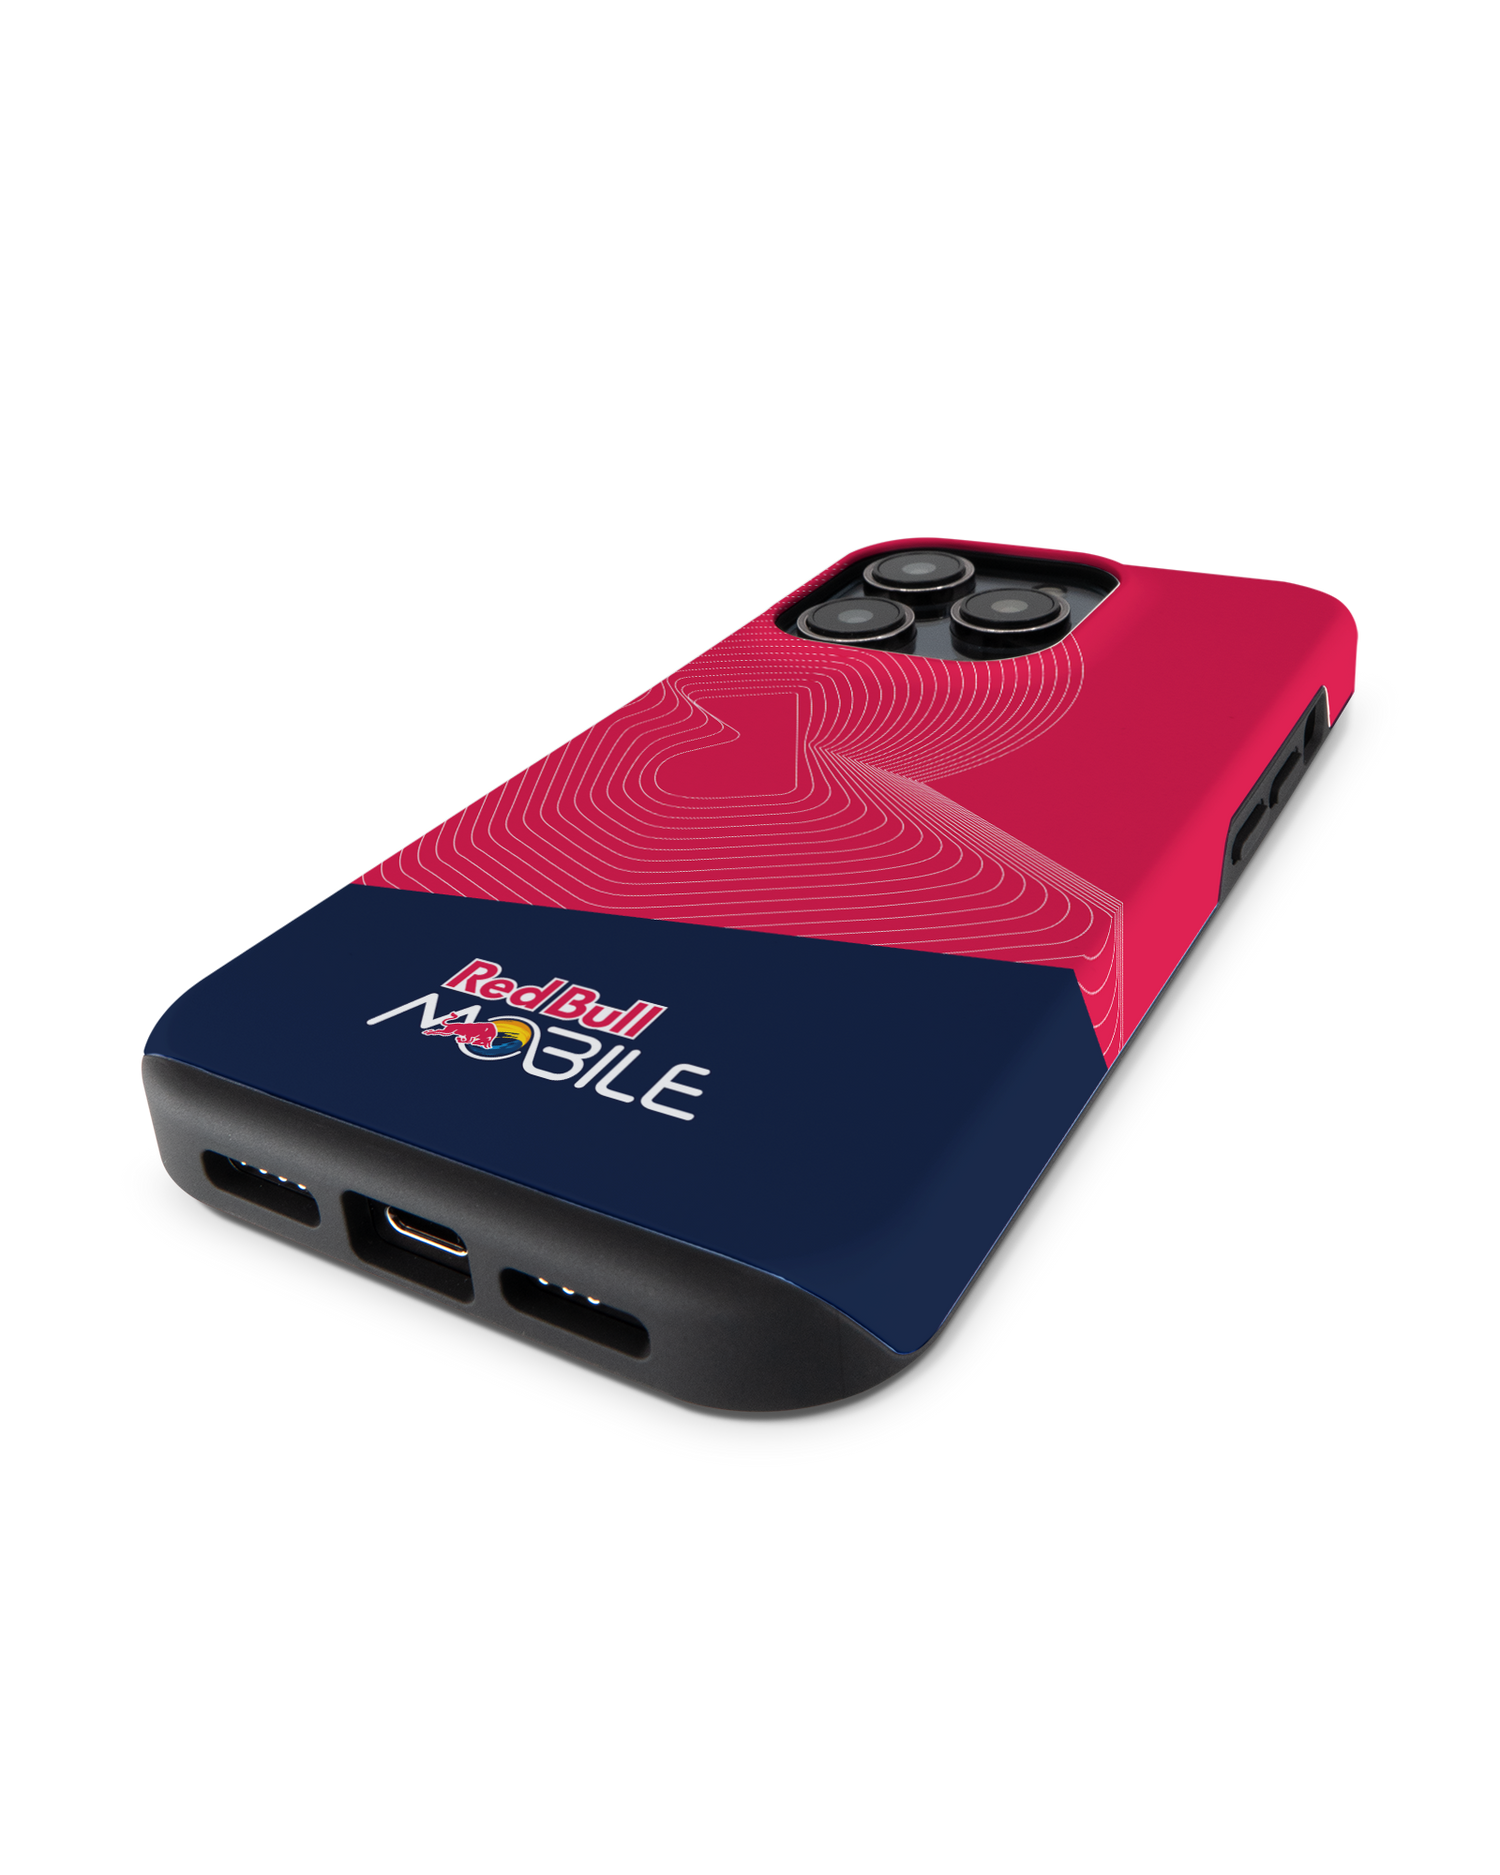 Red Bull MOBILE Red Premium Handyhülle Apple iPhone 14 Pro